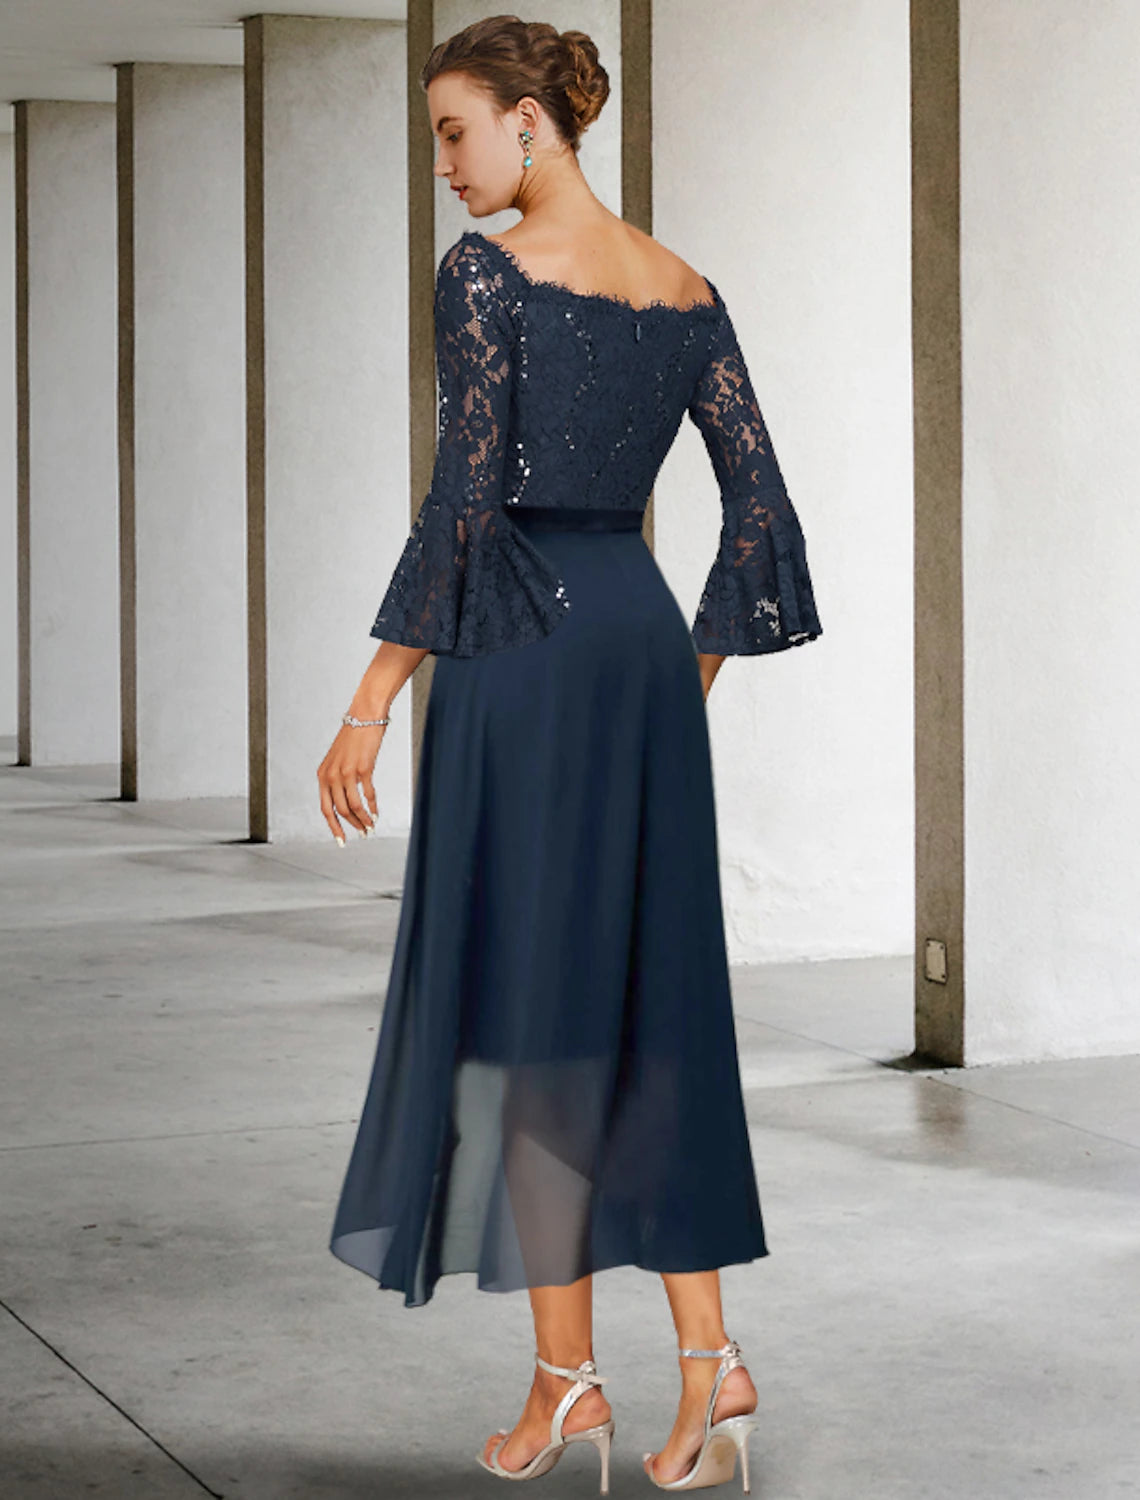 Two Piece Sheath / Column Mother of the Bride Dress Formal Wedding Guest Party Elegant Off Shoulder Knee Length Chiffon Lace Imitated Silk 3/4 Length Sleeve with Bow(s)